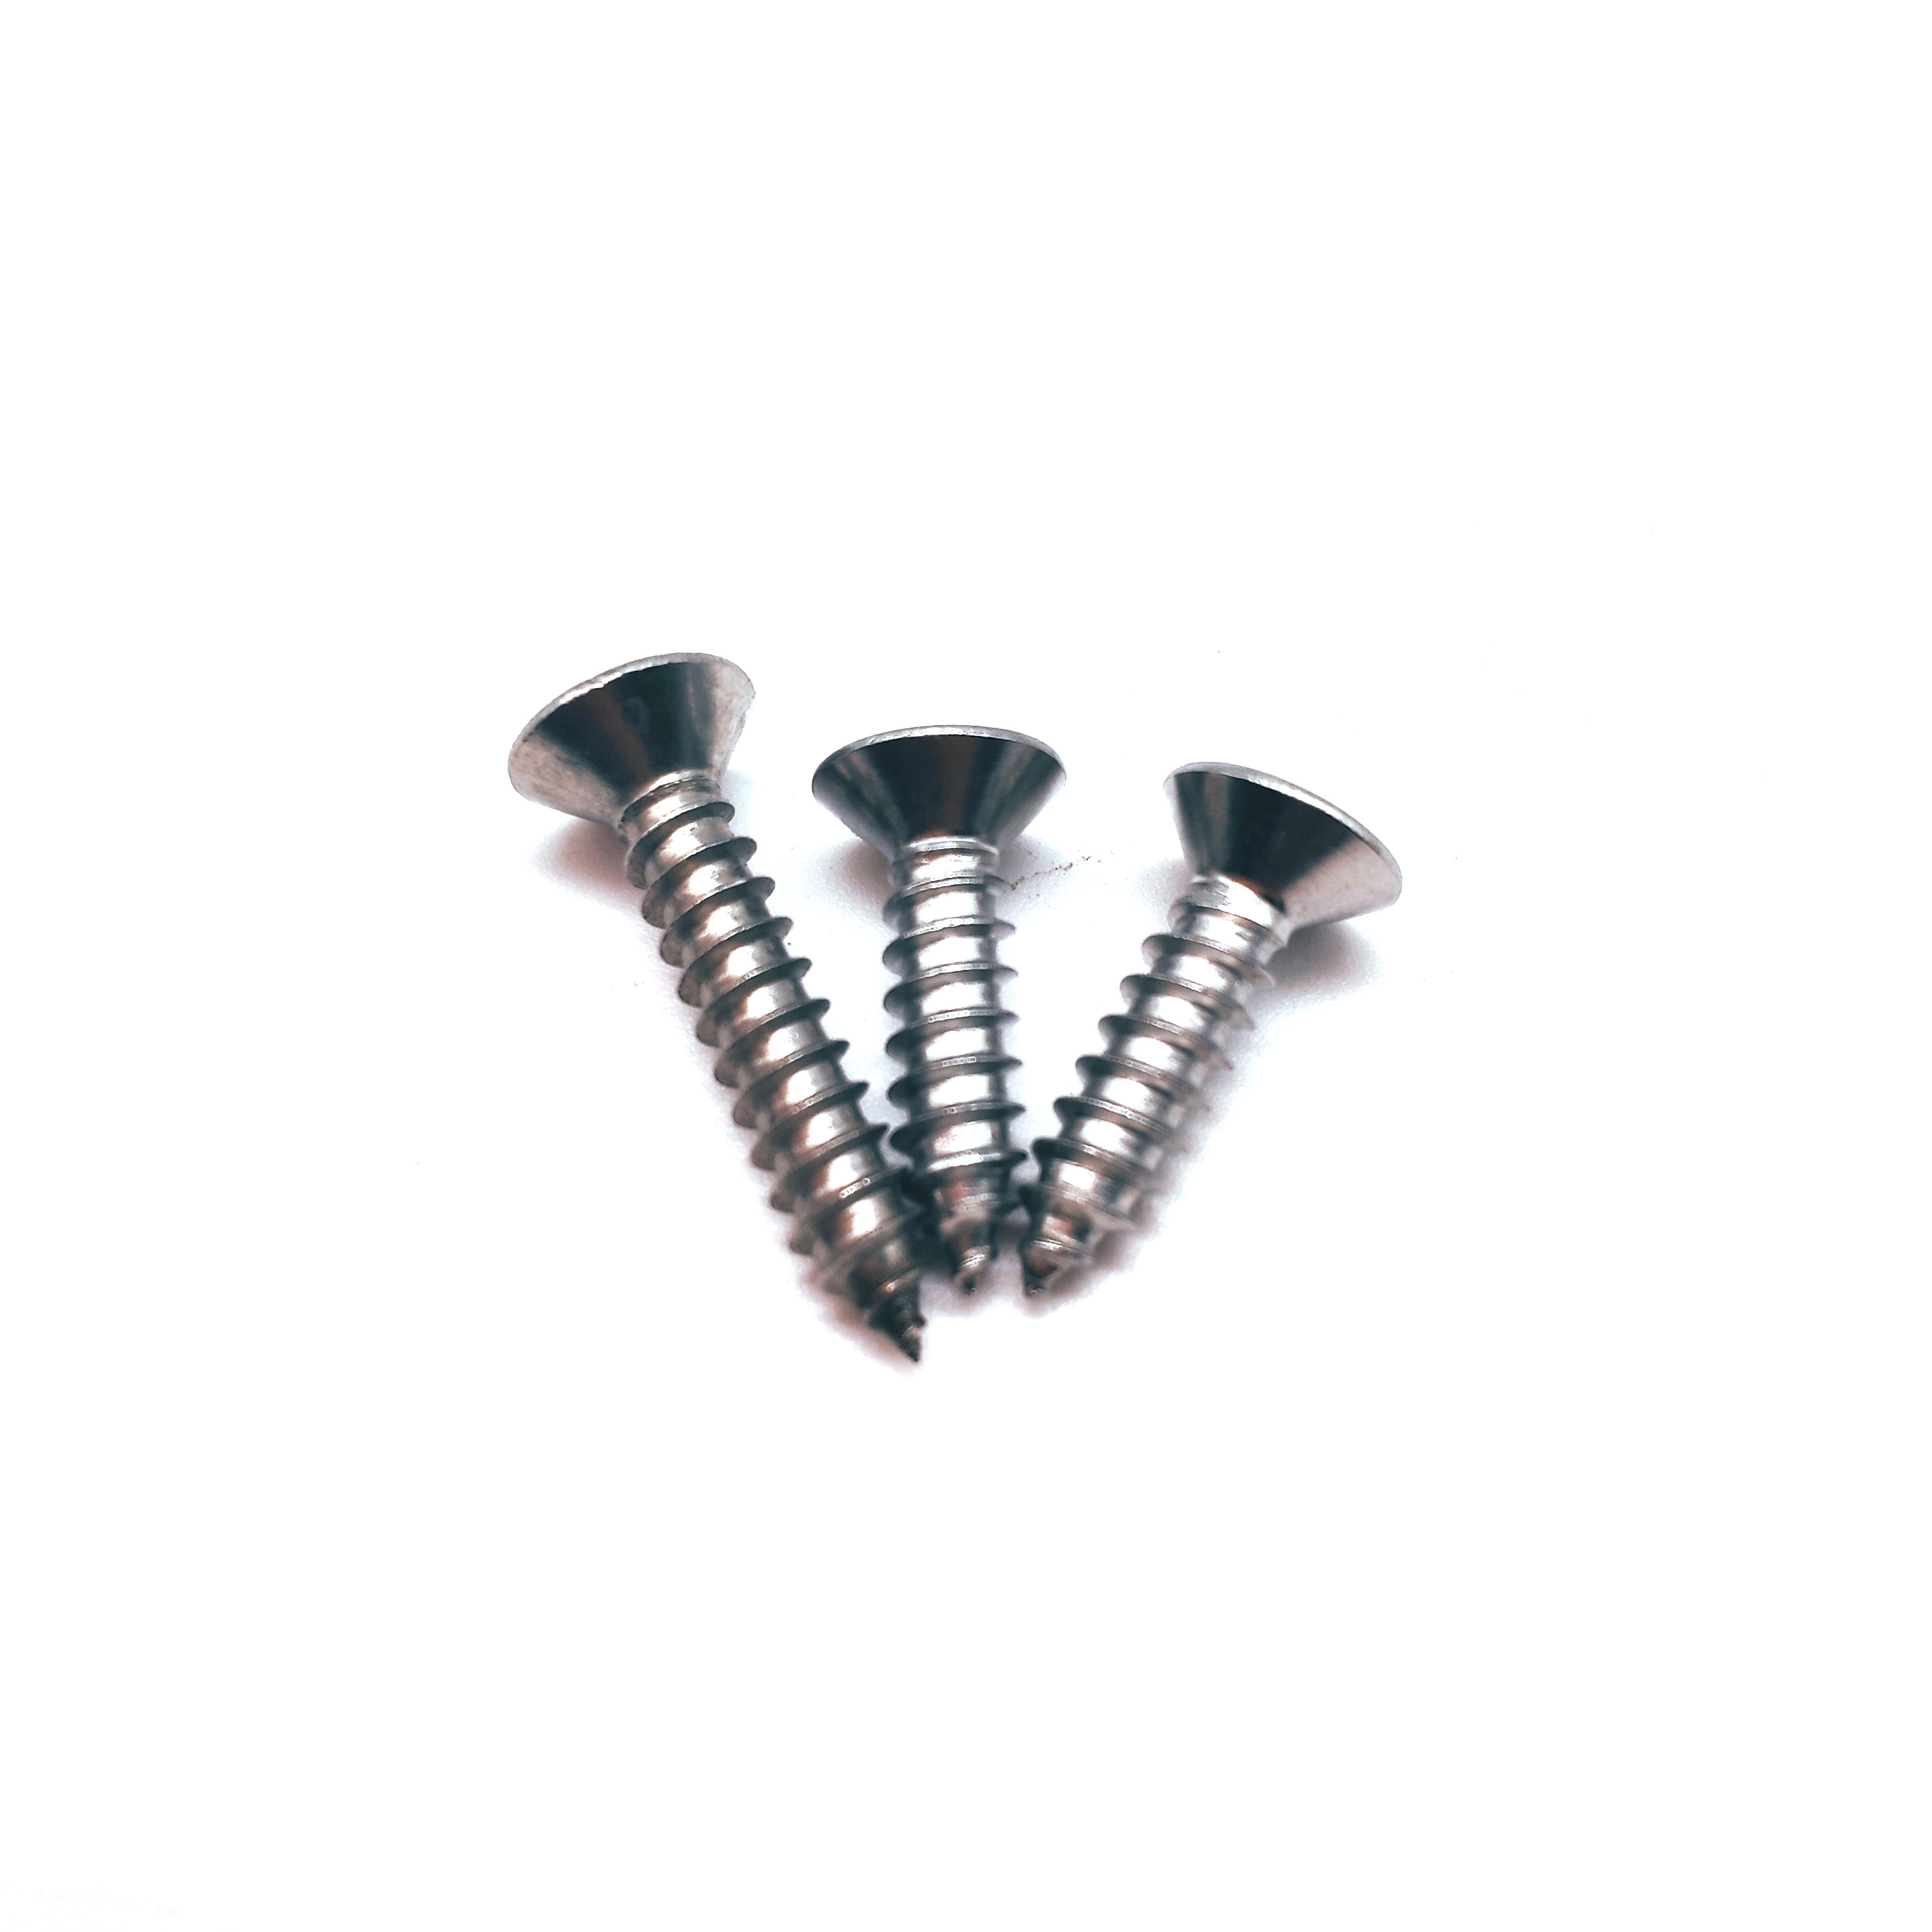  ANSI/ASME B 18.6.5M Stainless Steel Cross Recessed Slotted Countersunk Head Tapping Screw 